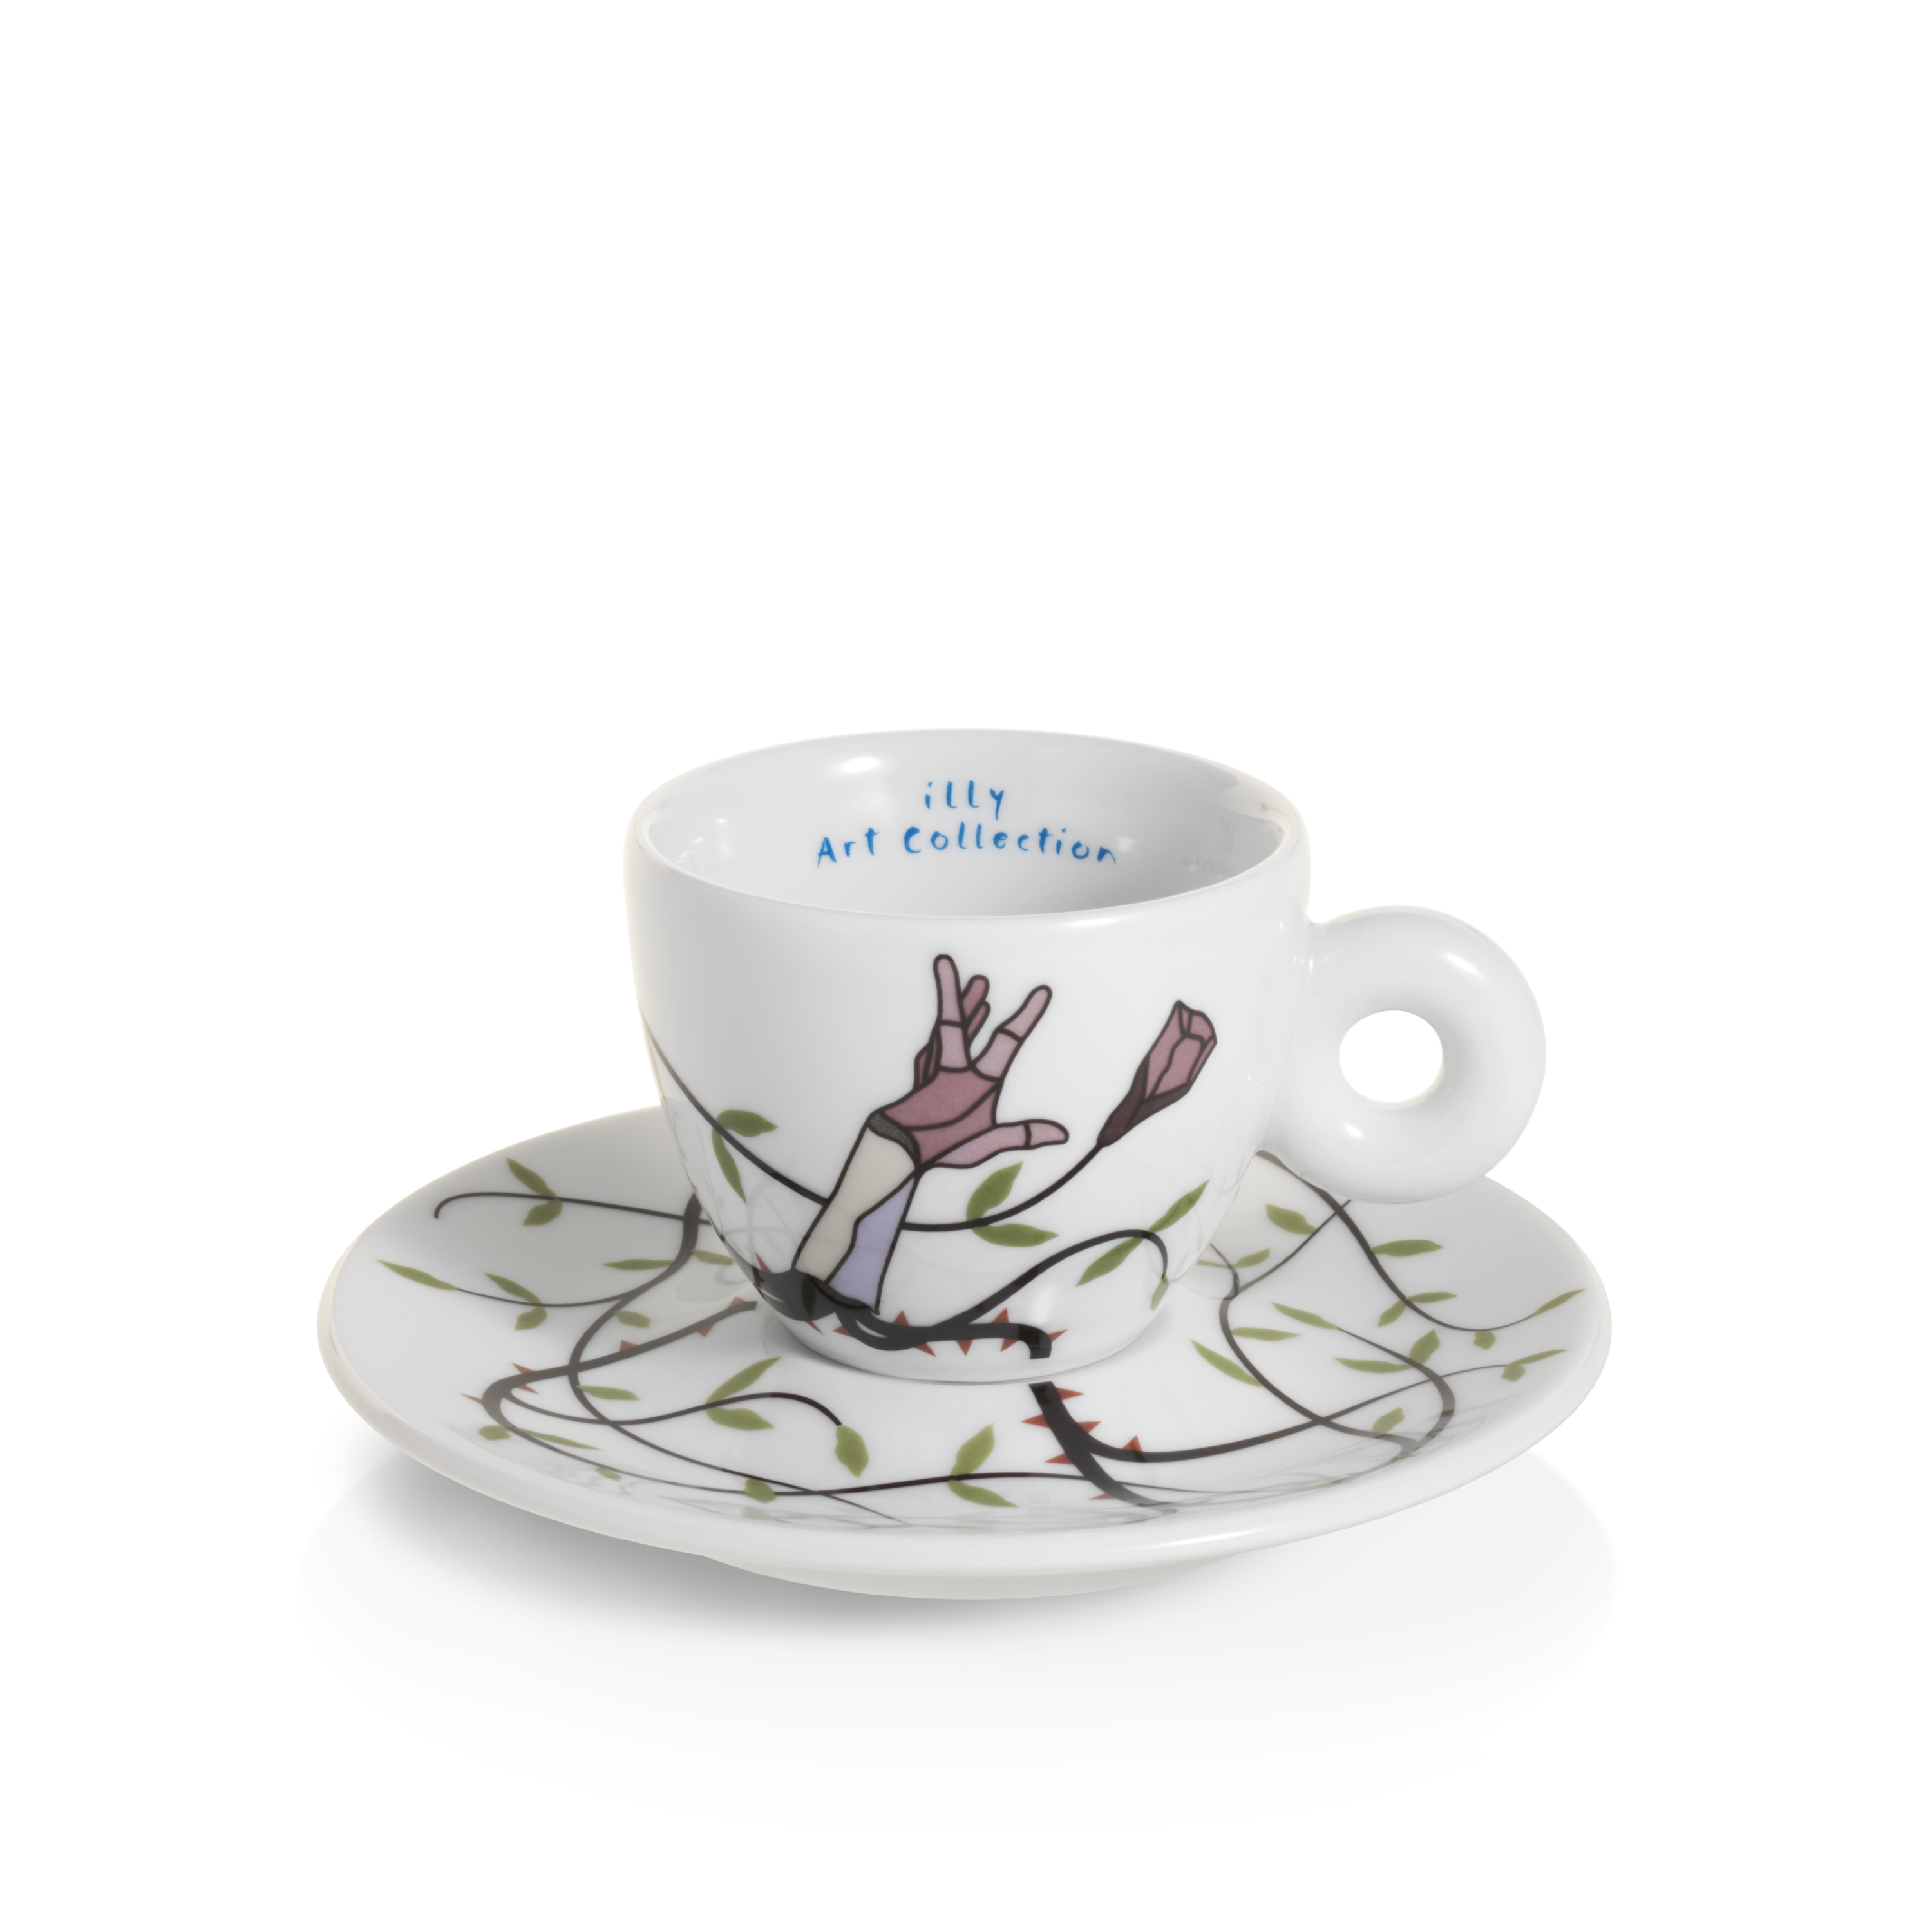 illy Art Collection ΒΙΕΝΝΑLE 2022 Gift Set 6 Espresso Cups, Cups, 02-02-6086